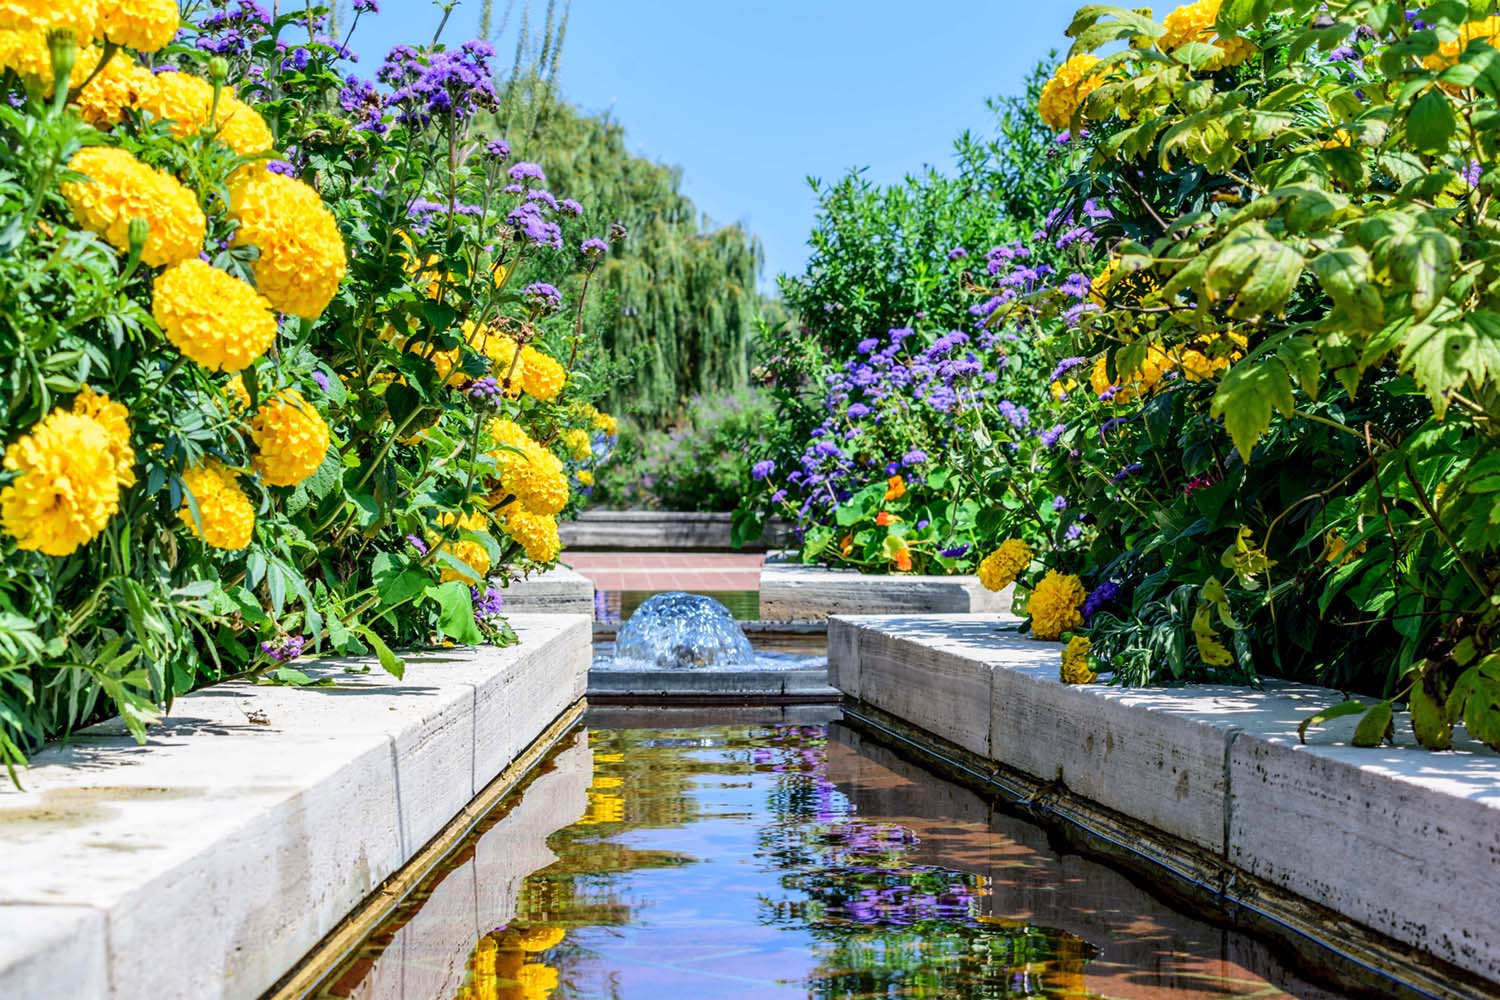 bellevue landscaping fountain with beautiful yellow and purple flowers 2022 11 07 05 22 52 utc stock photo placeholder